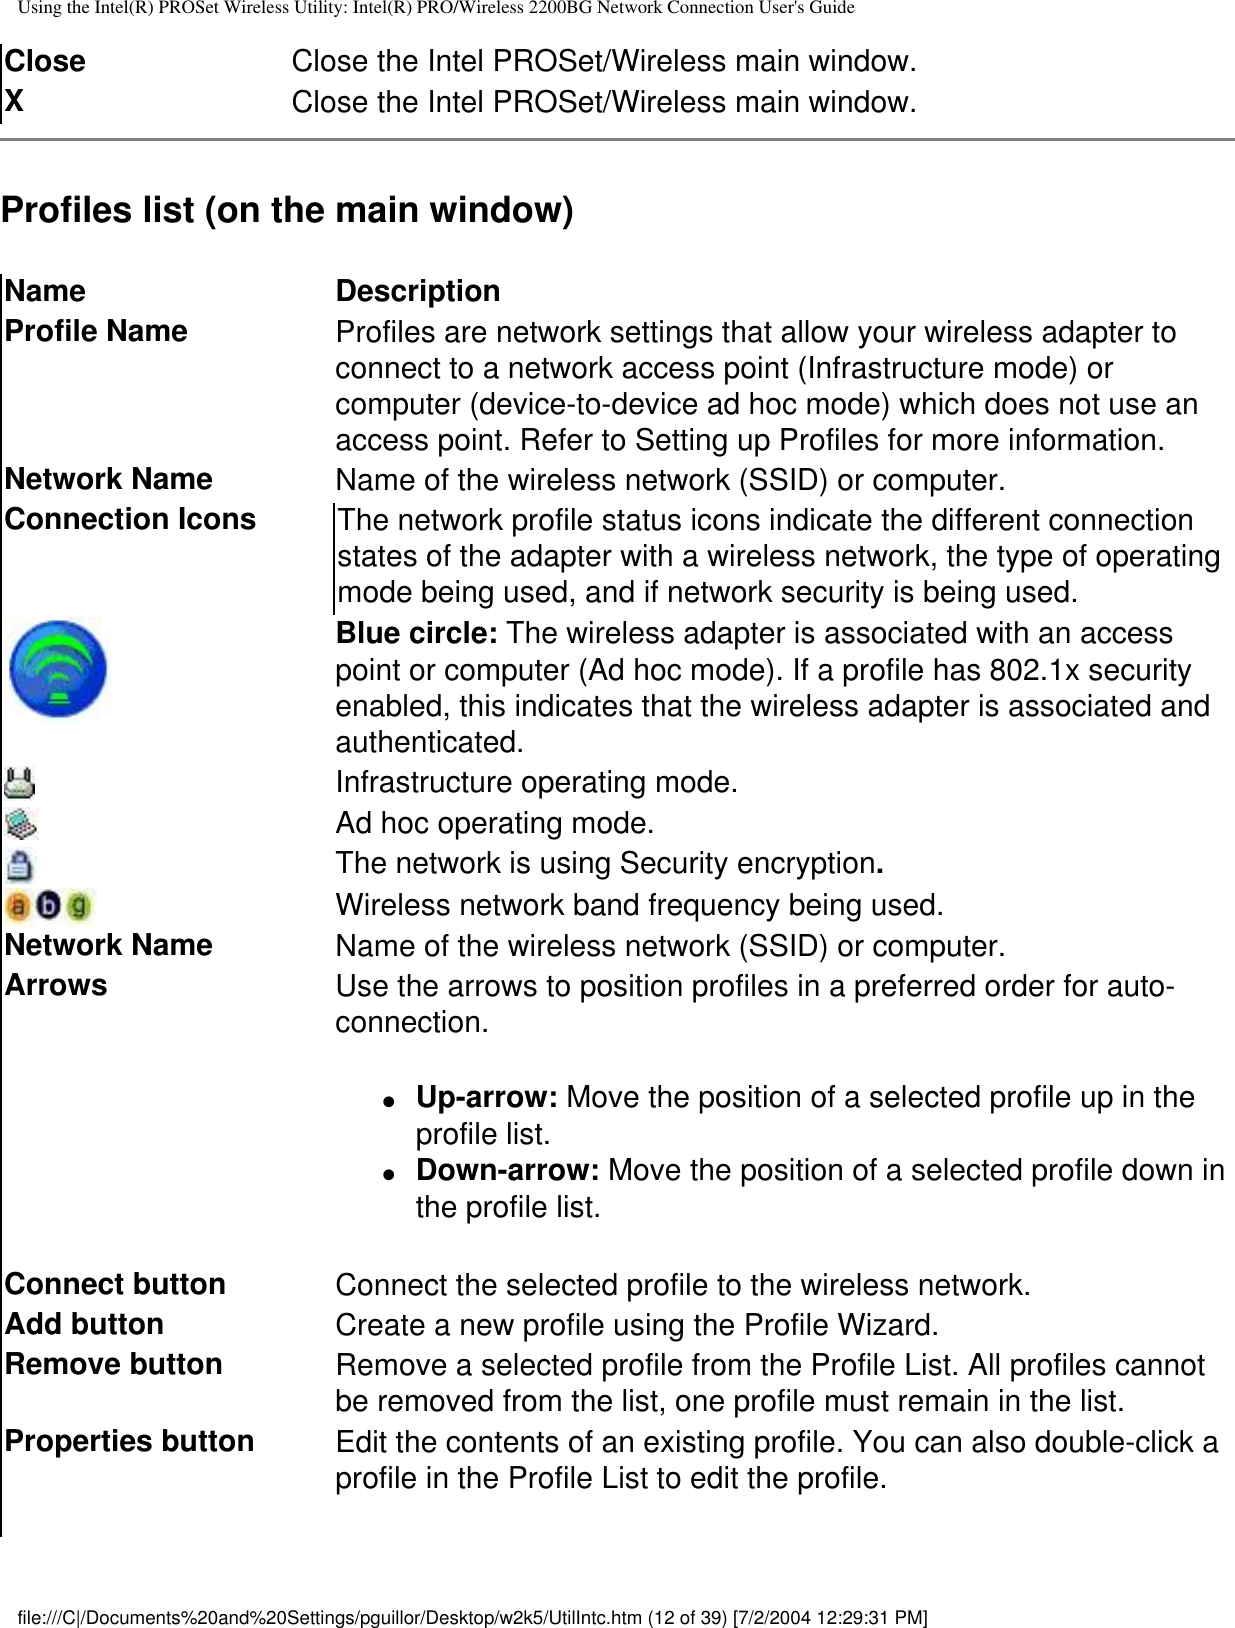 Using the Intel(R) PROSet Wireless Utility: Intel(R) PRO/Wireless 2200BG Network Connection User&apos;s GuideClose Close the Intel PROSet/Wireless main window.XClose the Intel PROSet/Wireless main window.Profiles list (on the main window)Name DescriptionProfile Name Profiles are network settings that allow your wireless adapter to connect to a network access point (Infrastructure mode) or computer (device-to-device ad hoc mode) which does not use an access point. Refer to Setting up Profiles for more information.Network Name Name of the wireless network (SSID) or computer.Connection Icons The network profile status icons indicate the different connection states of the adapter with a wireless network, the type of operating mode being used, and if network security is being used.Blue circle: The wireless adapter is associated with an access point or computer (Ad hoc mode). If a profile has 802.1x security enabled, this indicates that the wireless adapter is associated and authenticated.Infrastructure operating mode.   Ad hoc operating mode.The network is using Security encryption.Wireless network band frequency being used.Network Name Name of the wireless network (SSID) or computer.Arrows Use the arrows to position profiles in a preferred order for auto-connection.●     Up-arrow: Move the position of a selected profile up in the profile list.●     Down-arrow: Move the position of a selected profile down in the profile list.  Connect button Connect the selected profile to the wireless network.Add button Create a new profile using the Profile Wizard. Remove button Remove a selected profile from the Profile List. All profiles cannot be removed from the list, one profile must remain in the list. Properties button Edit the contents of an existing profile. You can also double-click a profile in the Profile List to edit the profile.  file:///C|/Documents%20and%20Settings/pguillor/Desktop/w2k5/UtilIntc.htm (12 of 39) [7/2/2004 12:29:31 PM]